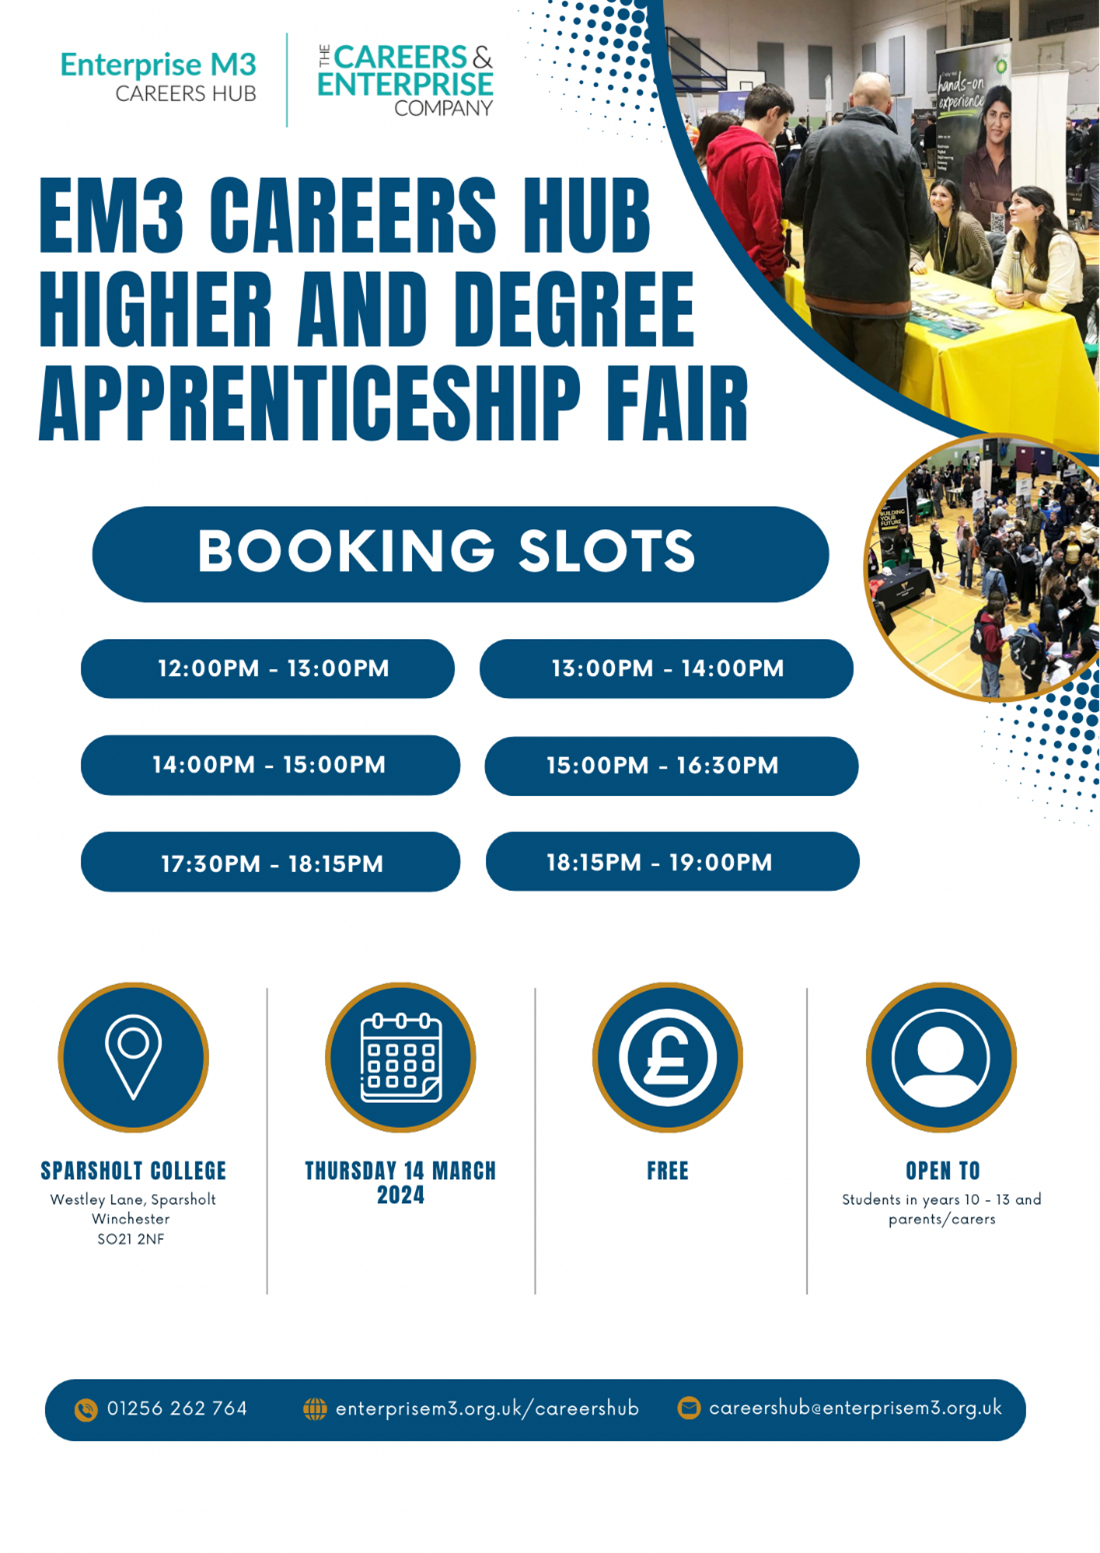 Higher and Degree Apprenticeship Fair booking form image